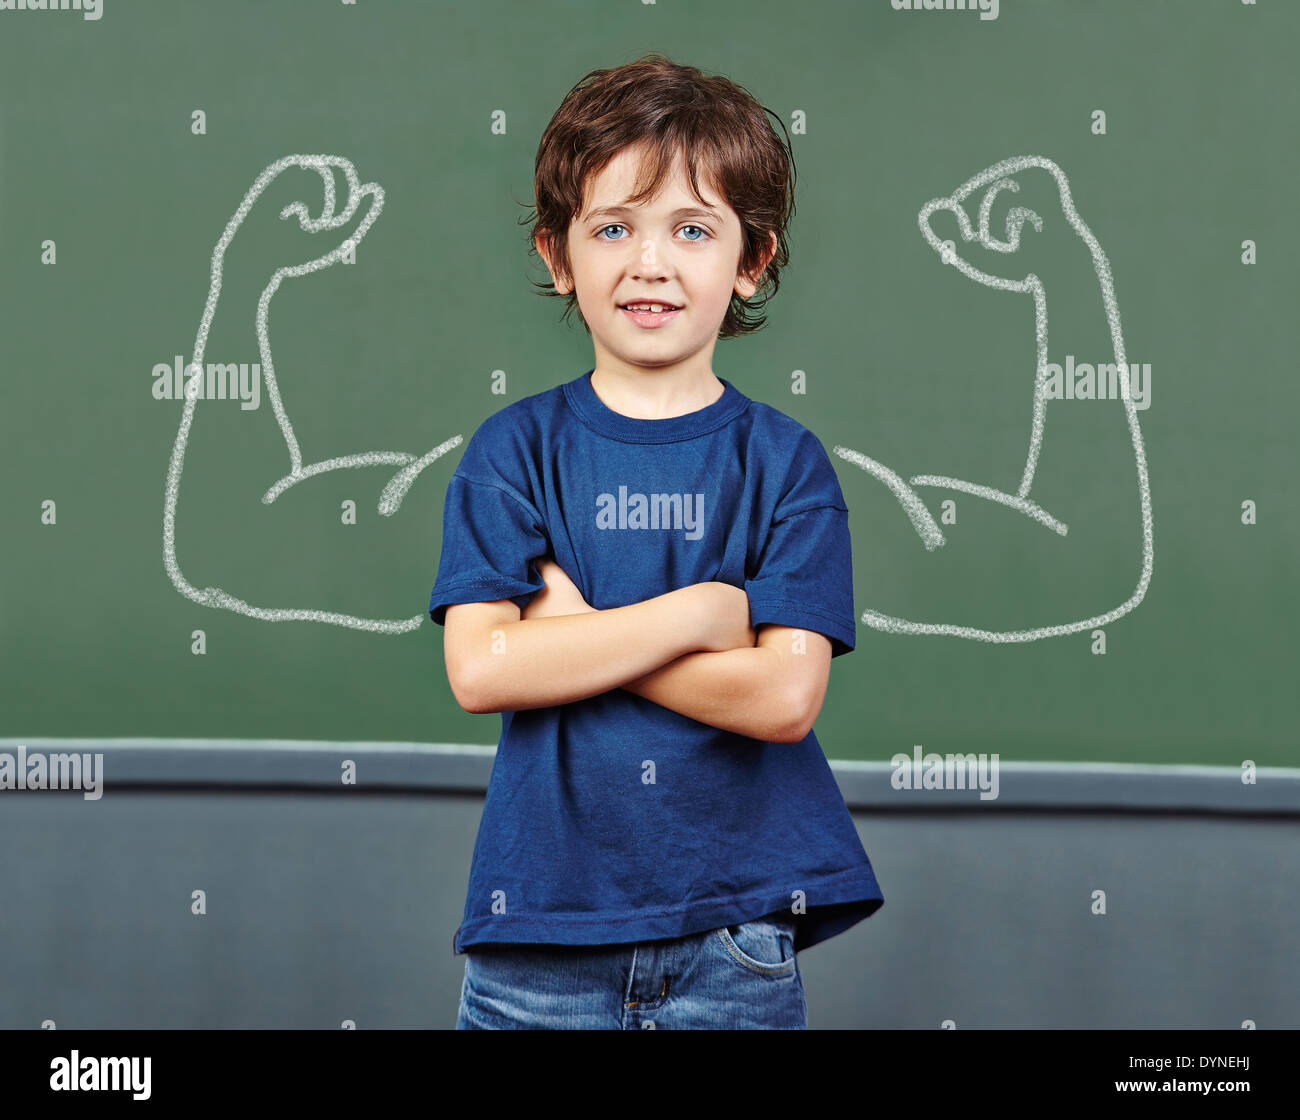 Strong child with muscles drawn on chalkboard in elementary school Stock Photo